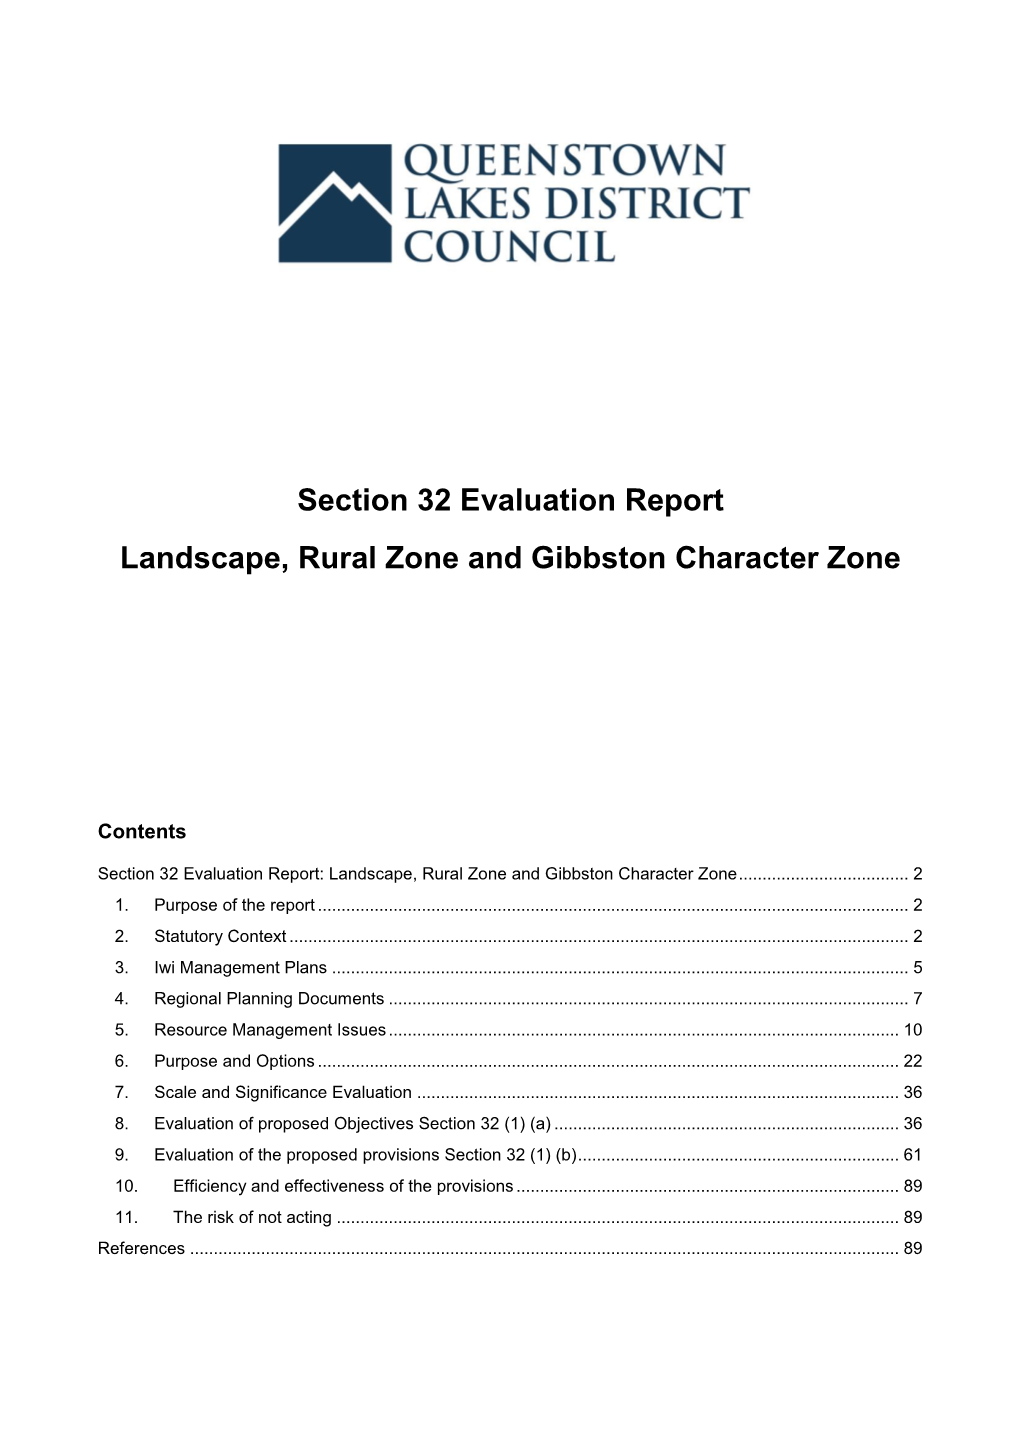 Section 32 Evaluation Report Landscape, Rural Zone and Gibbston Character Zone